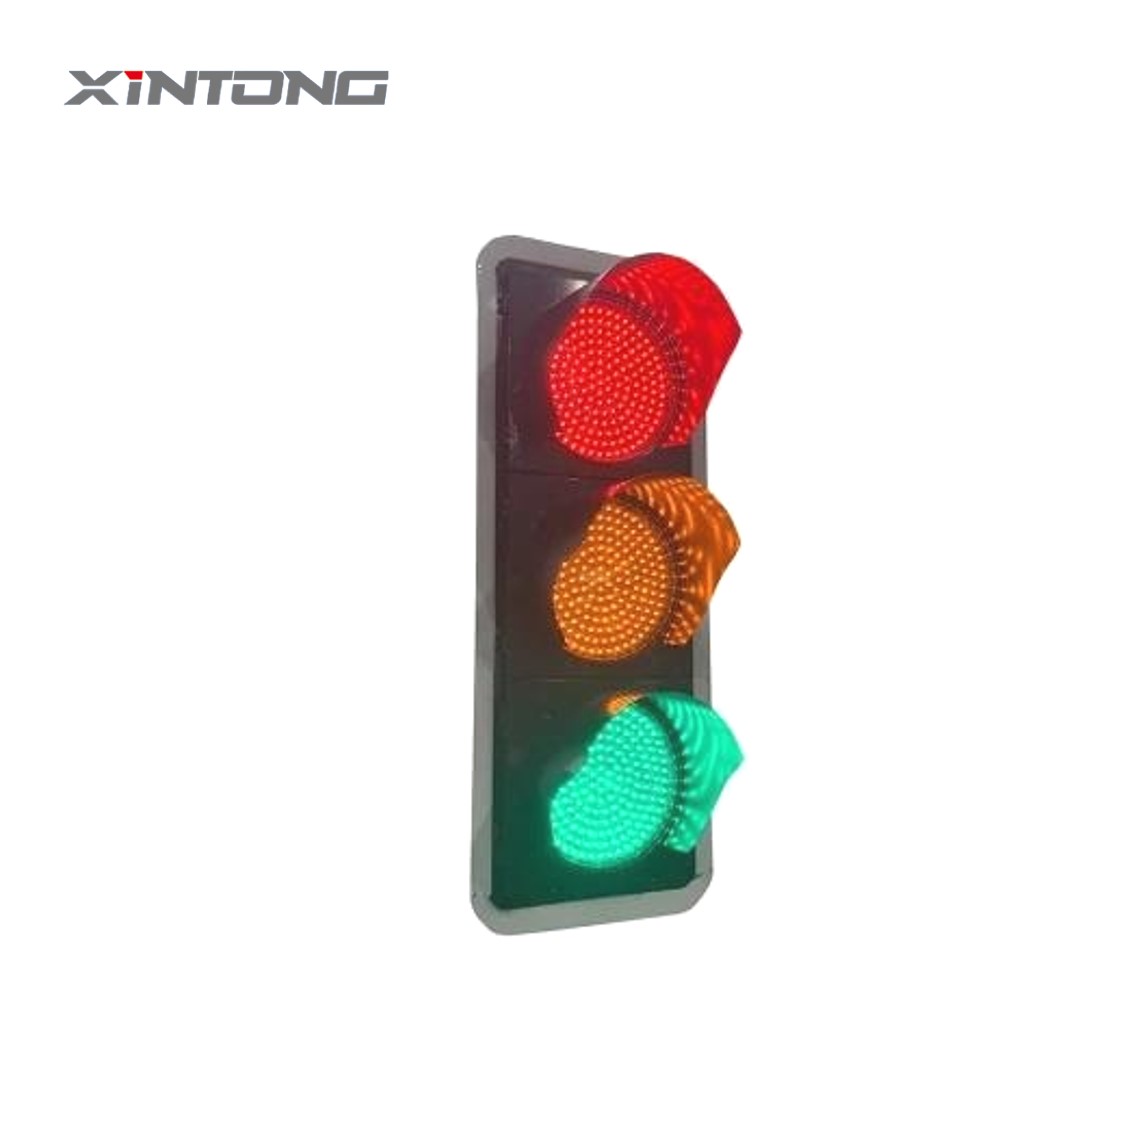 Discover the Benefits of 2 Way Traffic Signs for Efficient Road Navigation